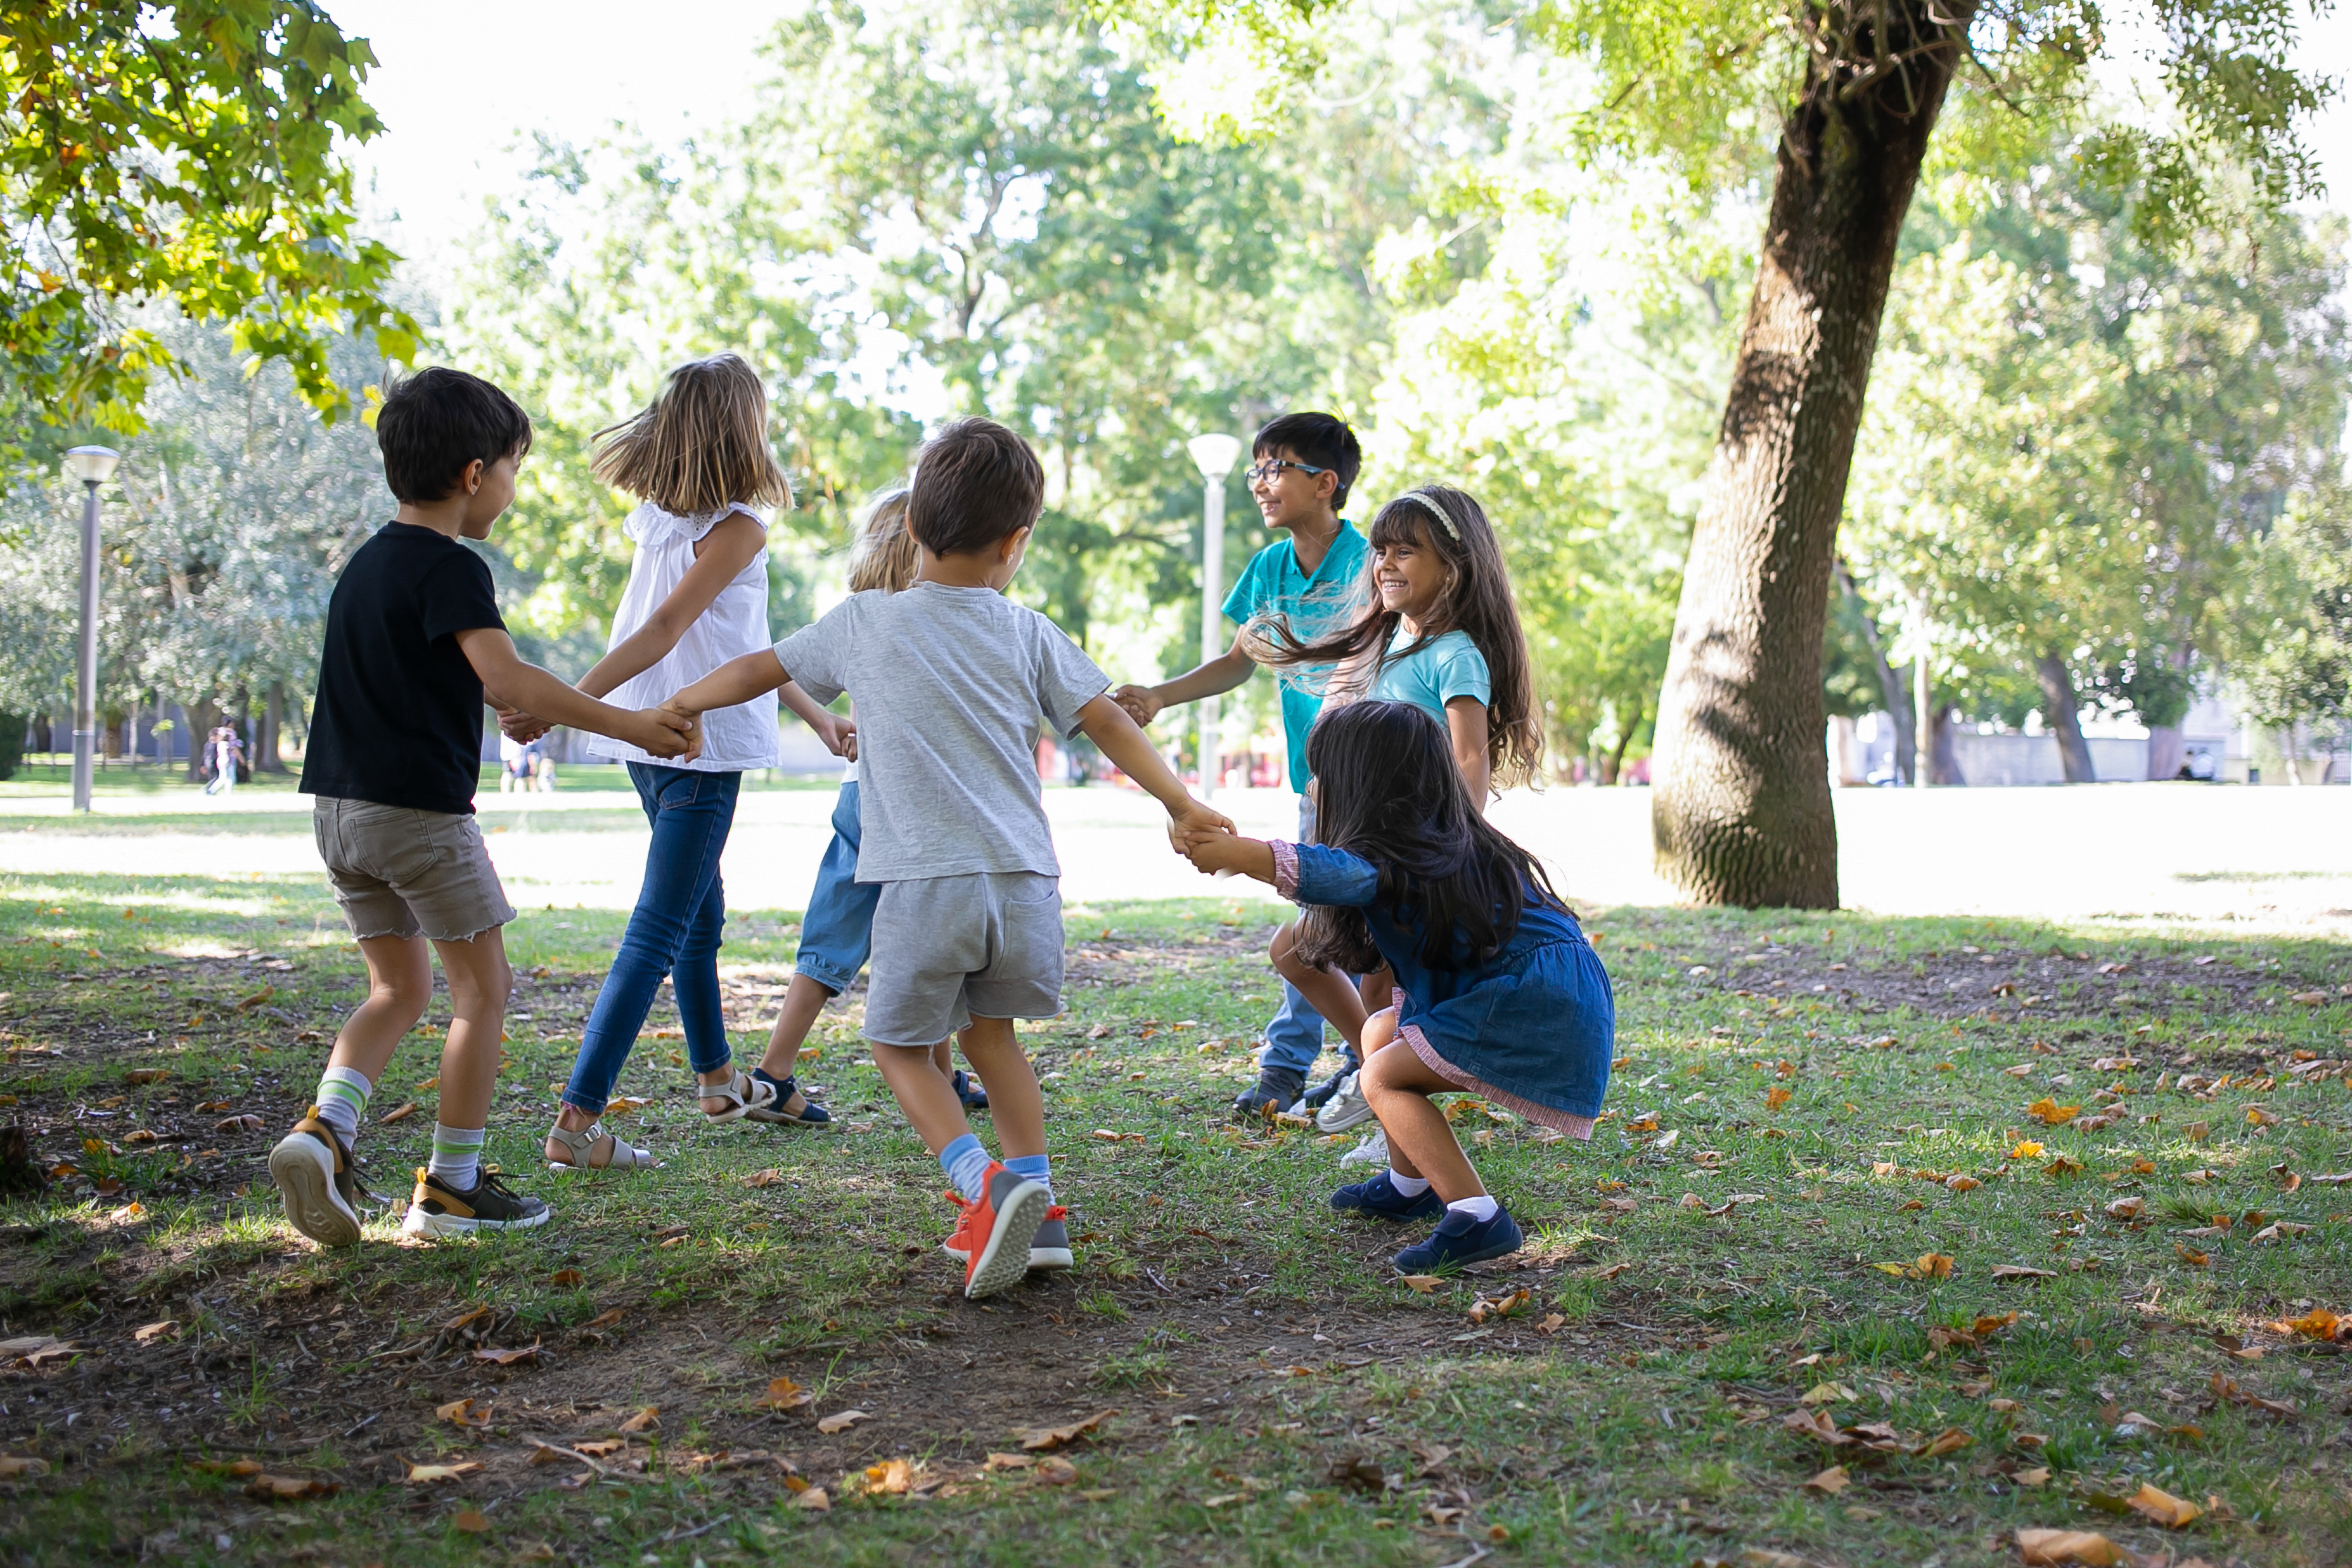 Happy Children Playing Together Outdoors Dancing Around Grass Enjoying Outdoor Activities Having Fun Park Kids Party Friendship Concept